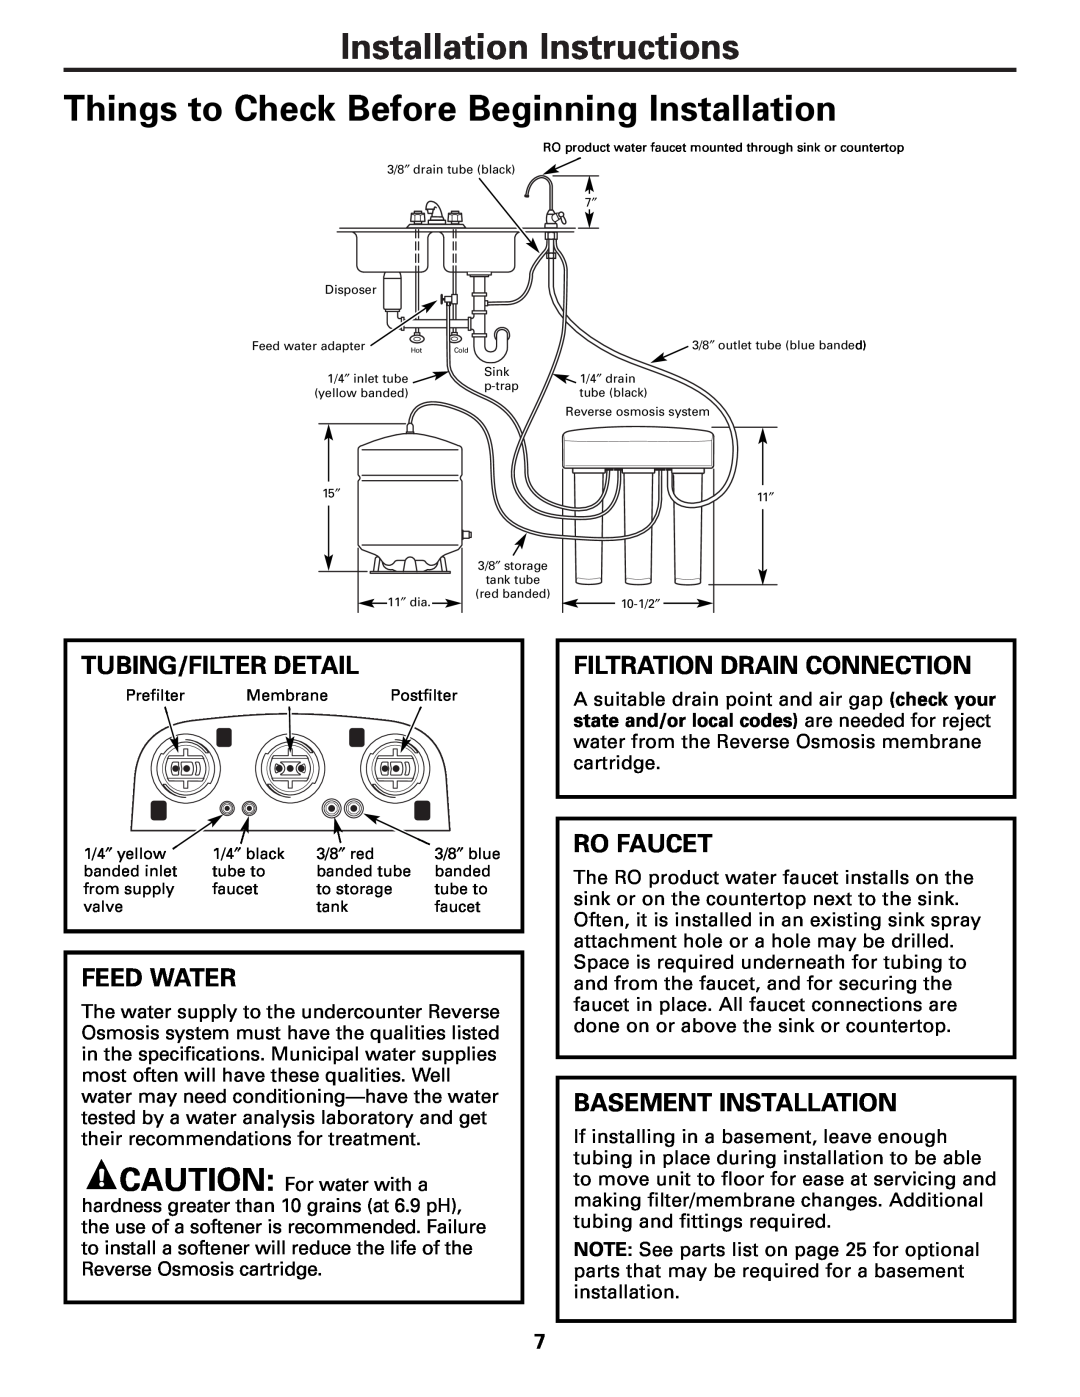 GE PNRQ21LRB Installation Instructions, Things to Check Before Beginning Installation, Tubing/Filter Detail, Feed Water 